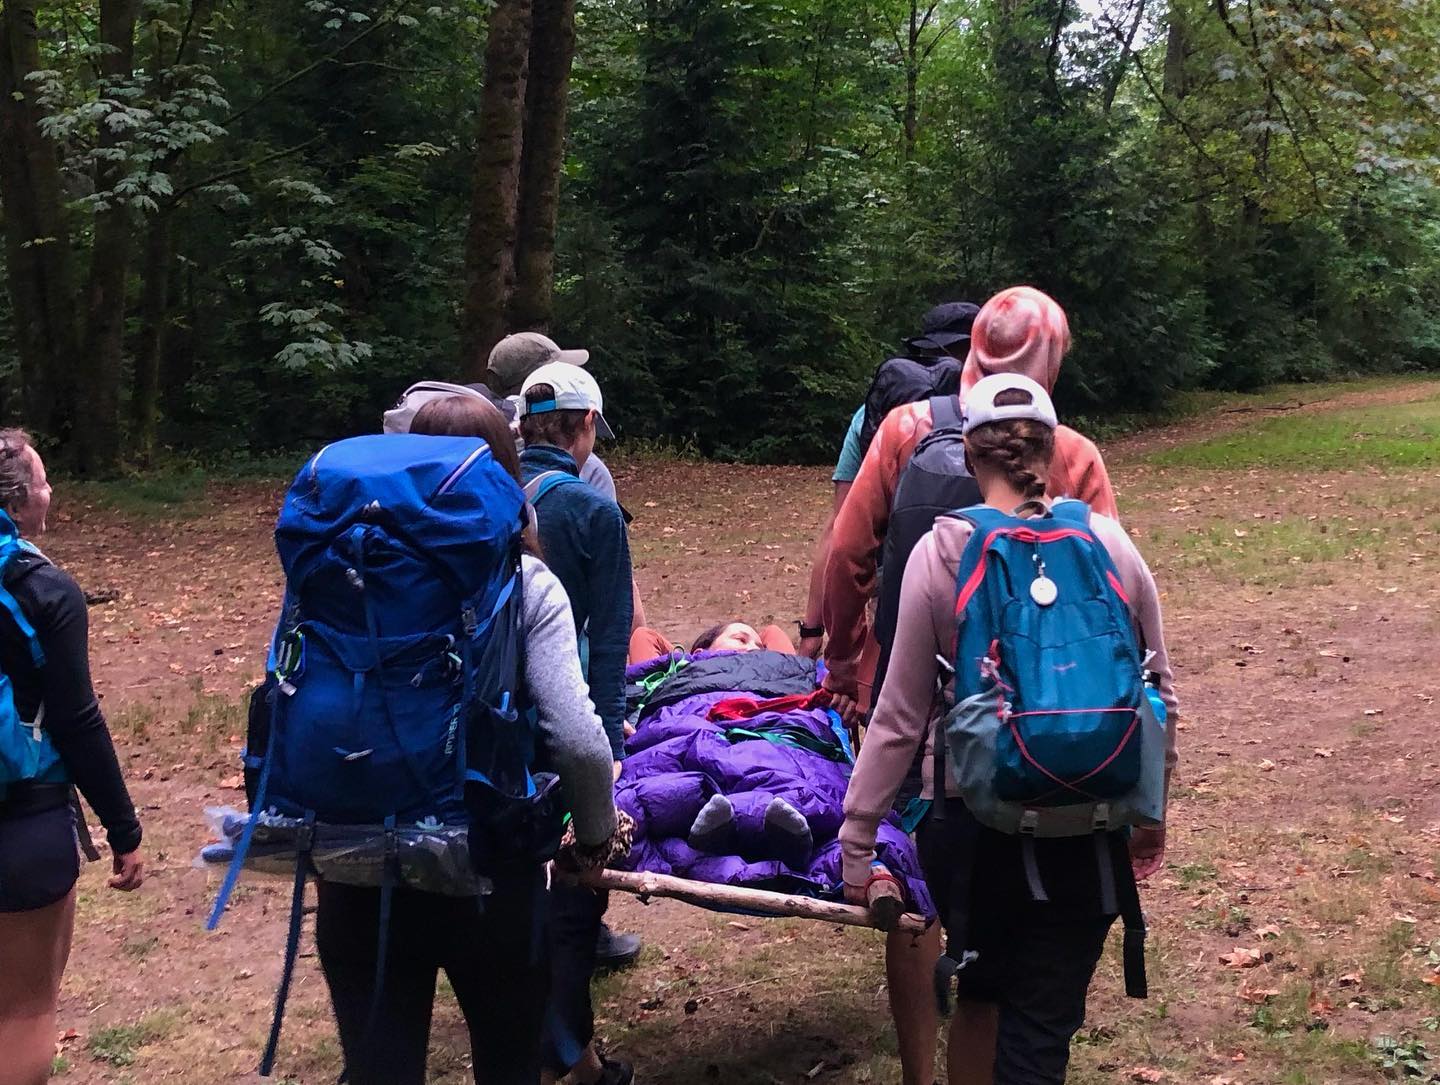 Group carrying patient out of remote area in Advanced Wilderness Certification training.